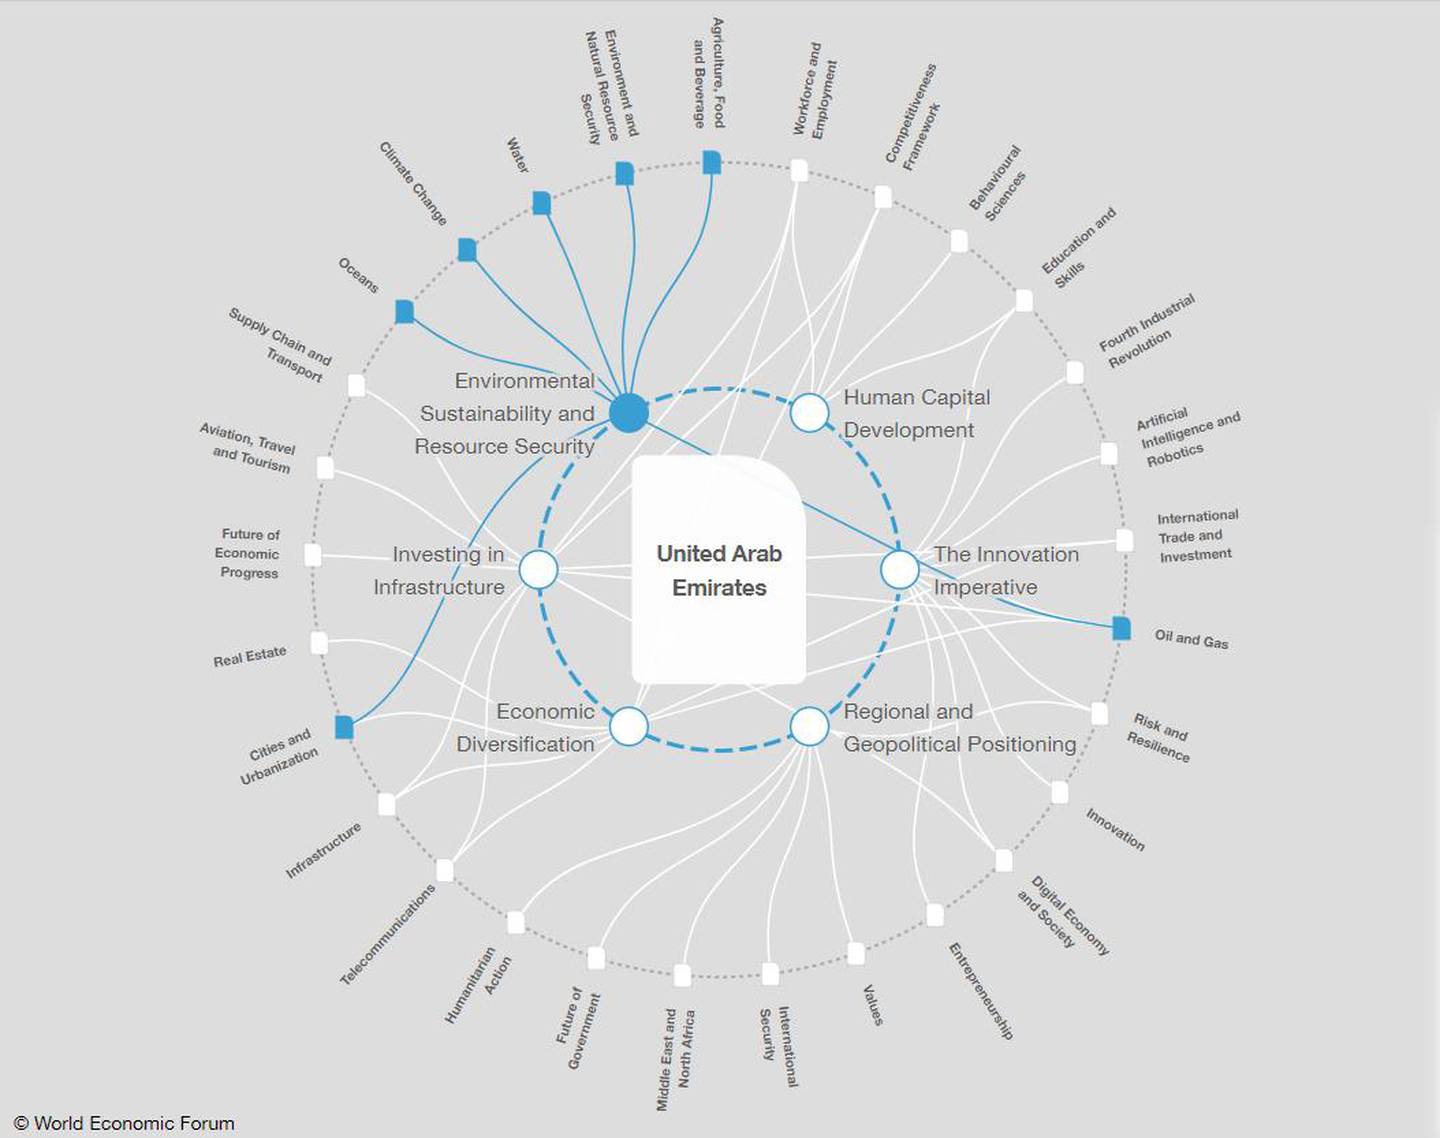 Environmental Sustainability and Resource Security / WEF